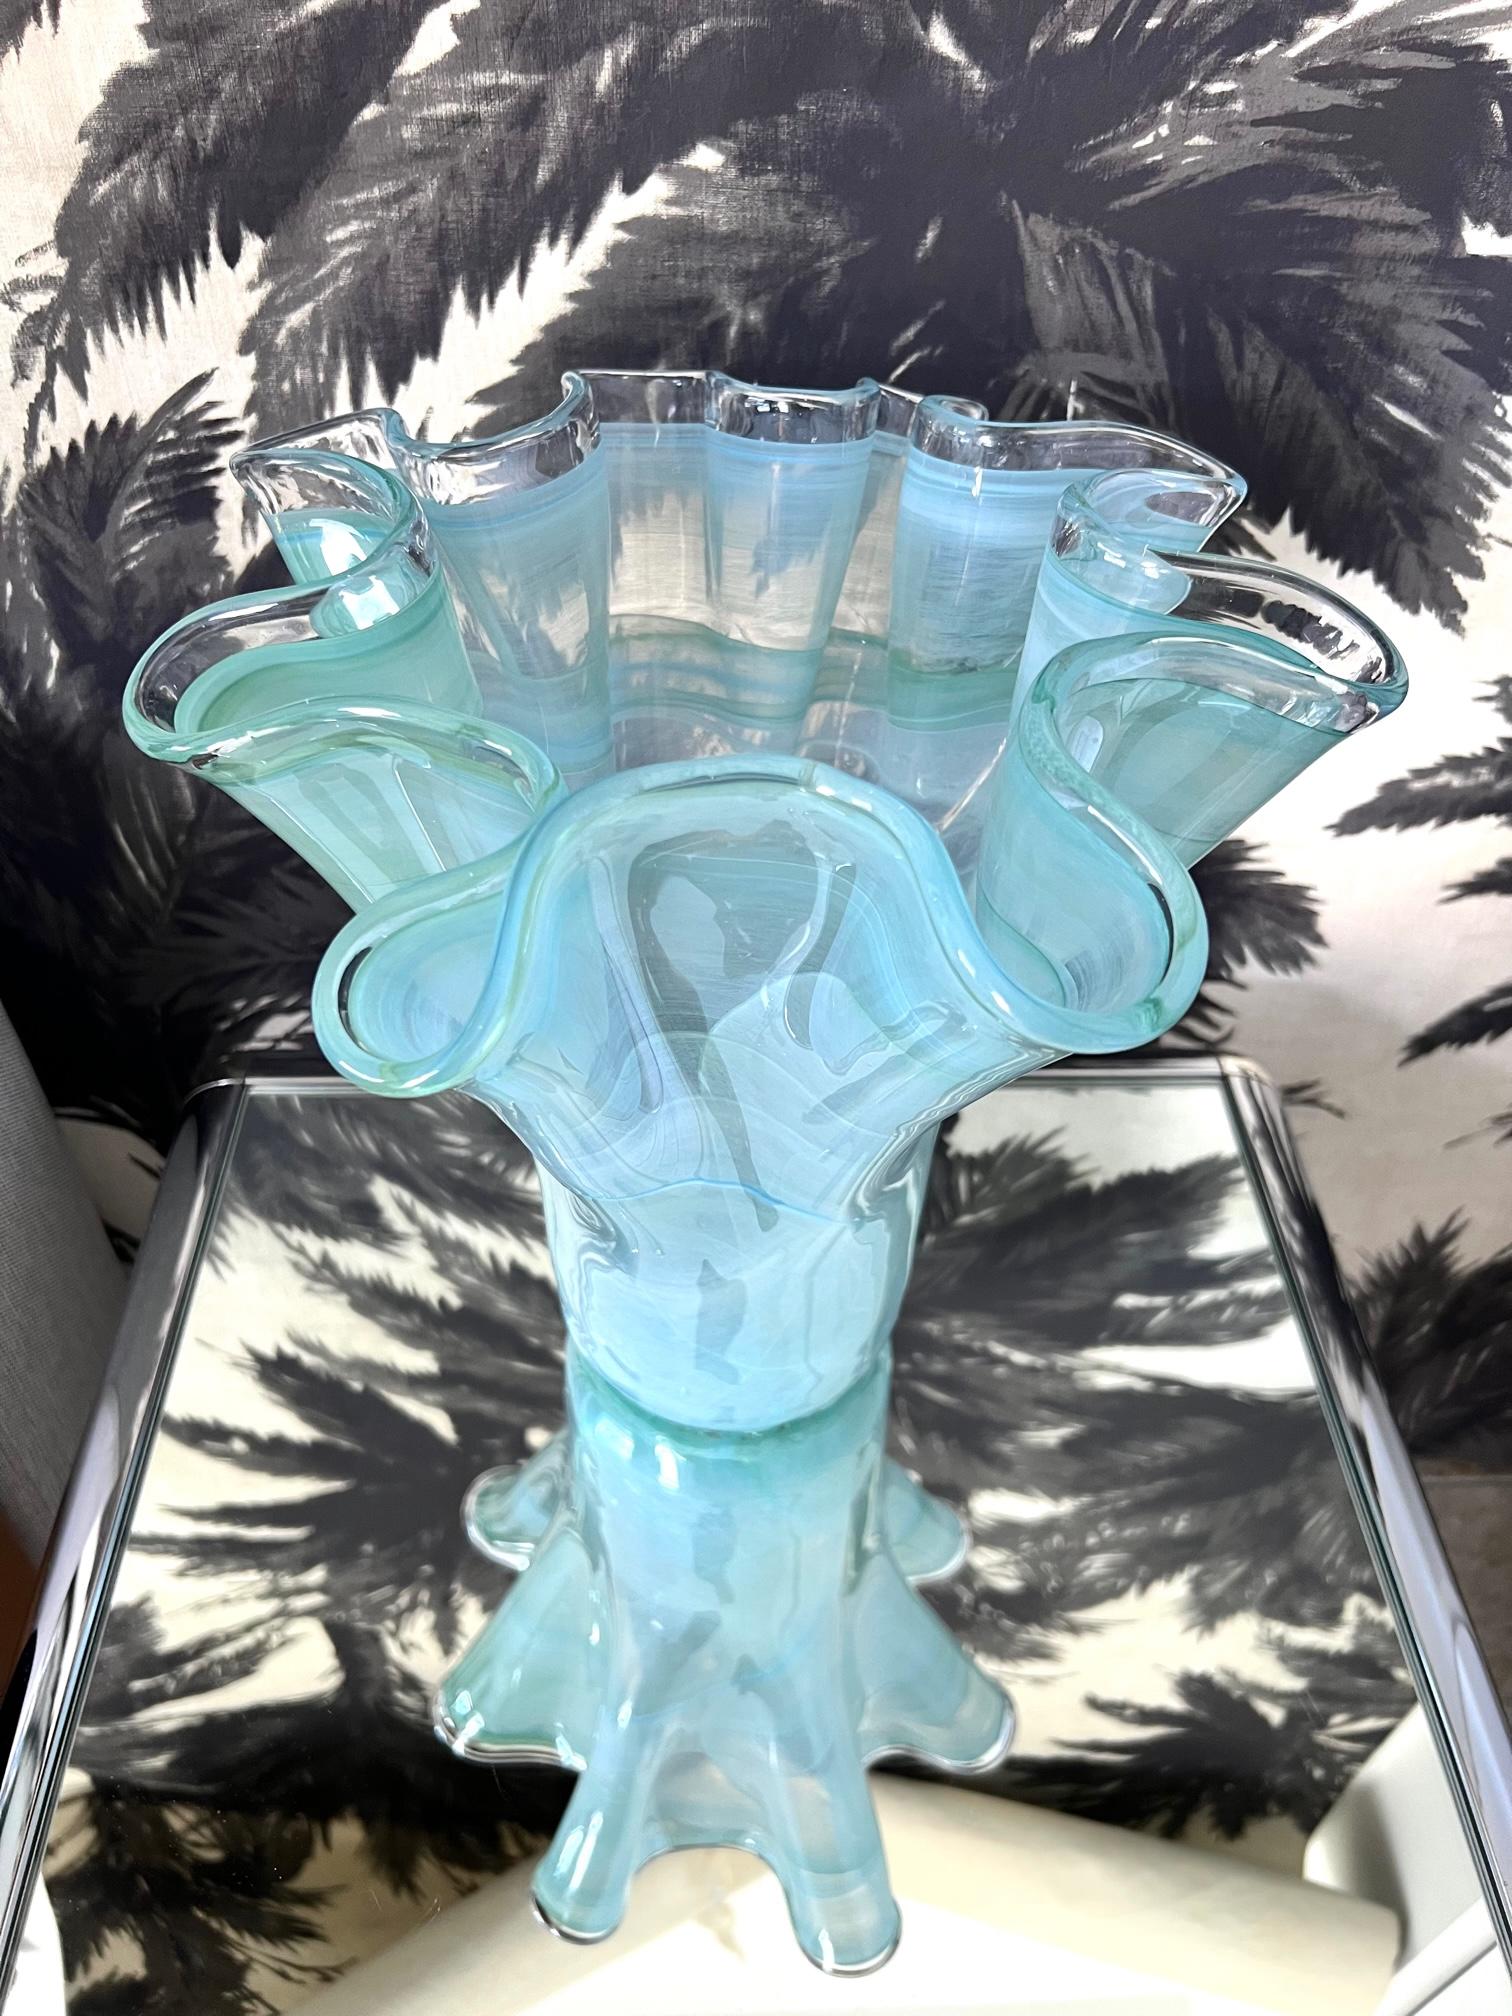 Hand-Crafted Vintage Murano Glass Vase in Celadon & Turquoise with Fazzoletto Design, c. 1980